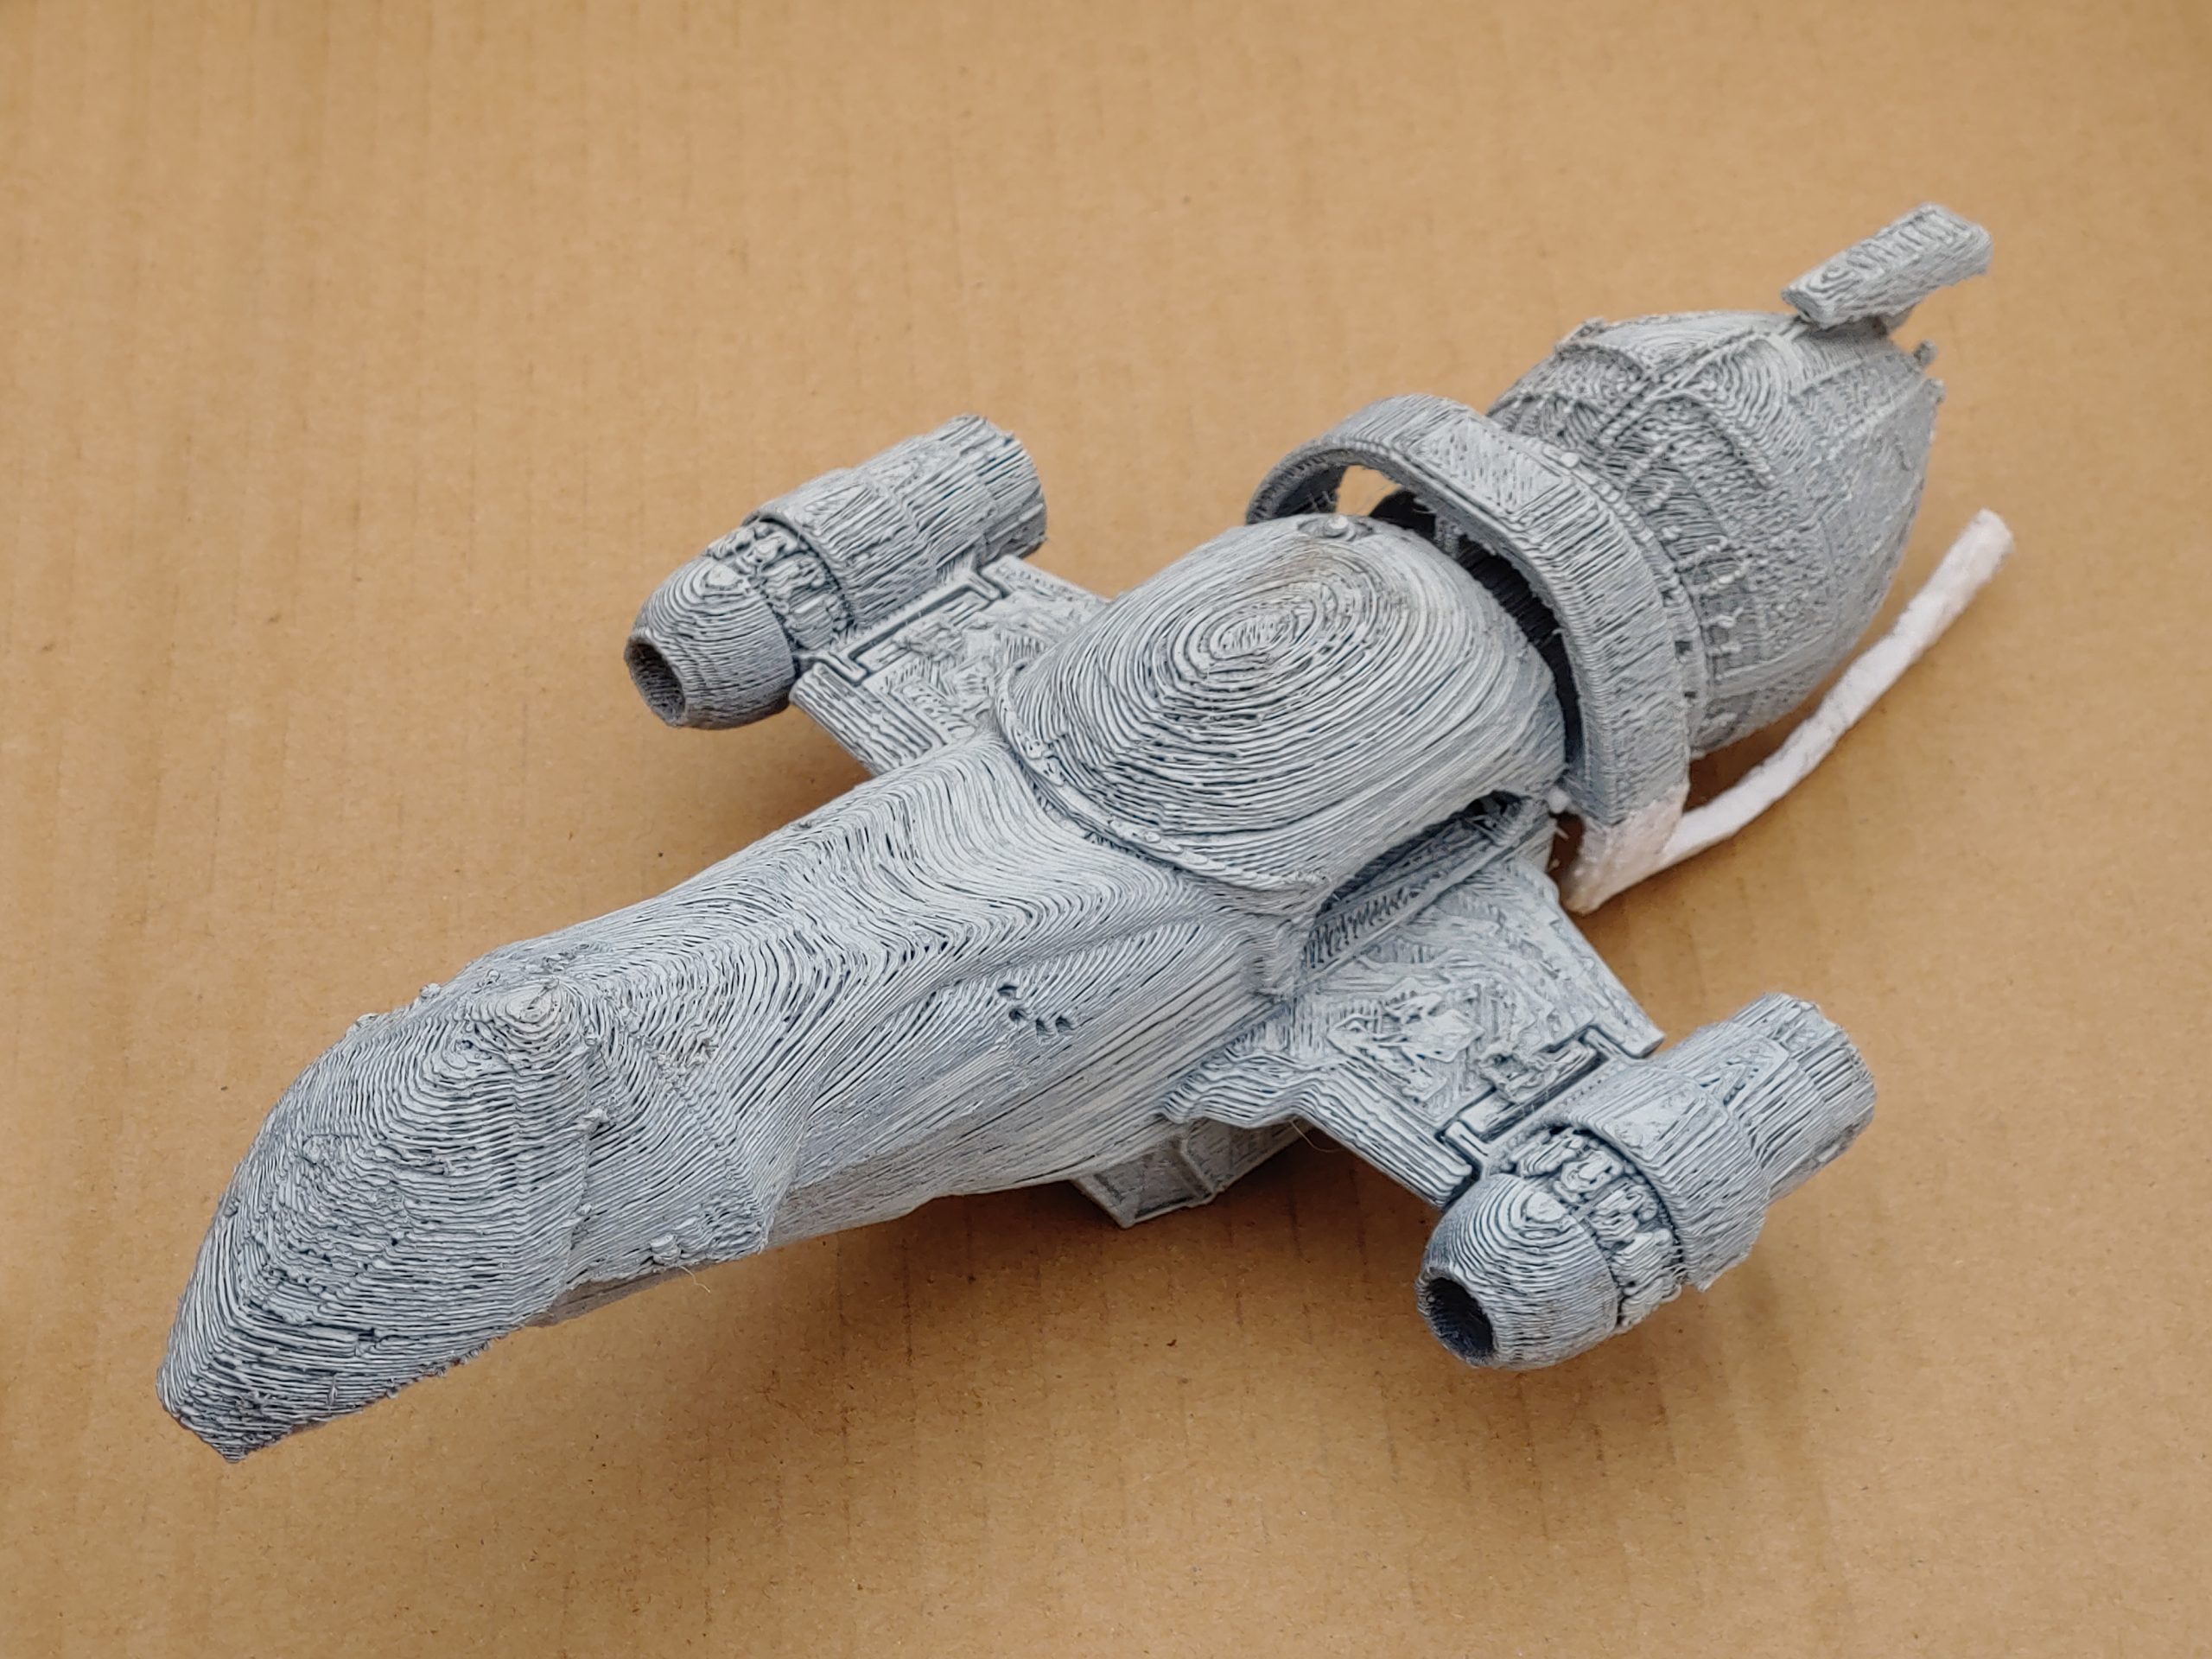 3D printed firefly class transport ship from Firefly show and serenity movie, with a rear bar repaired using a 3D pen